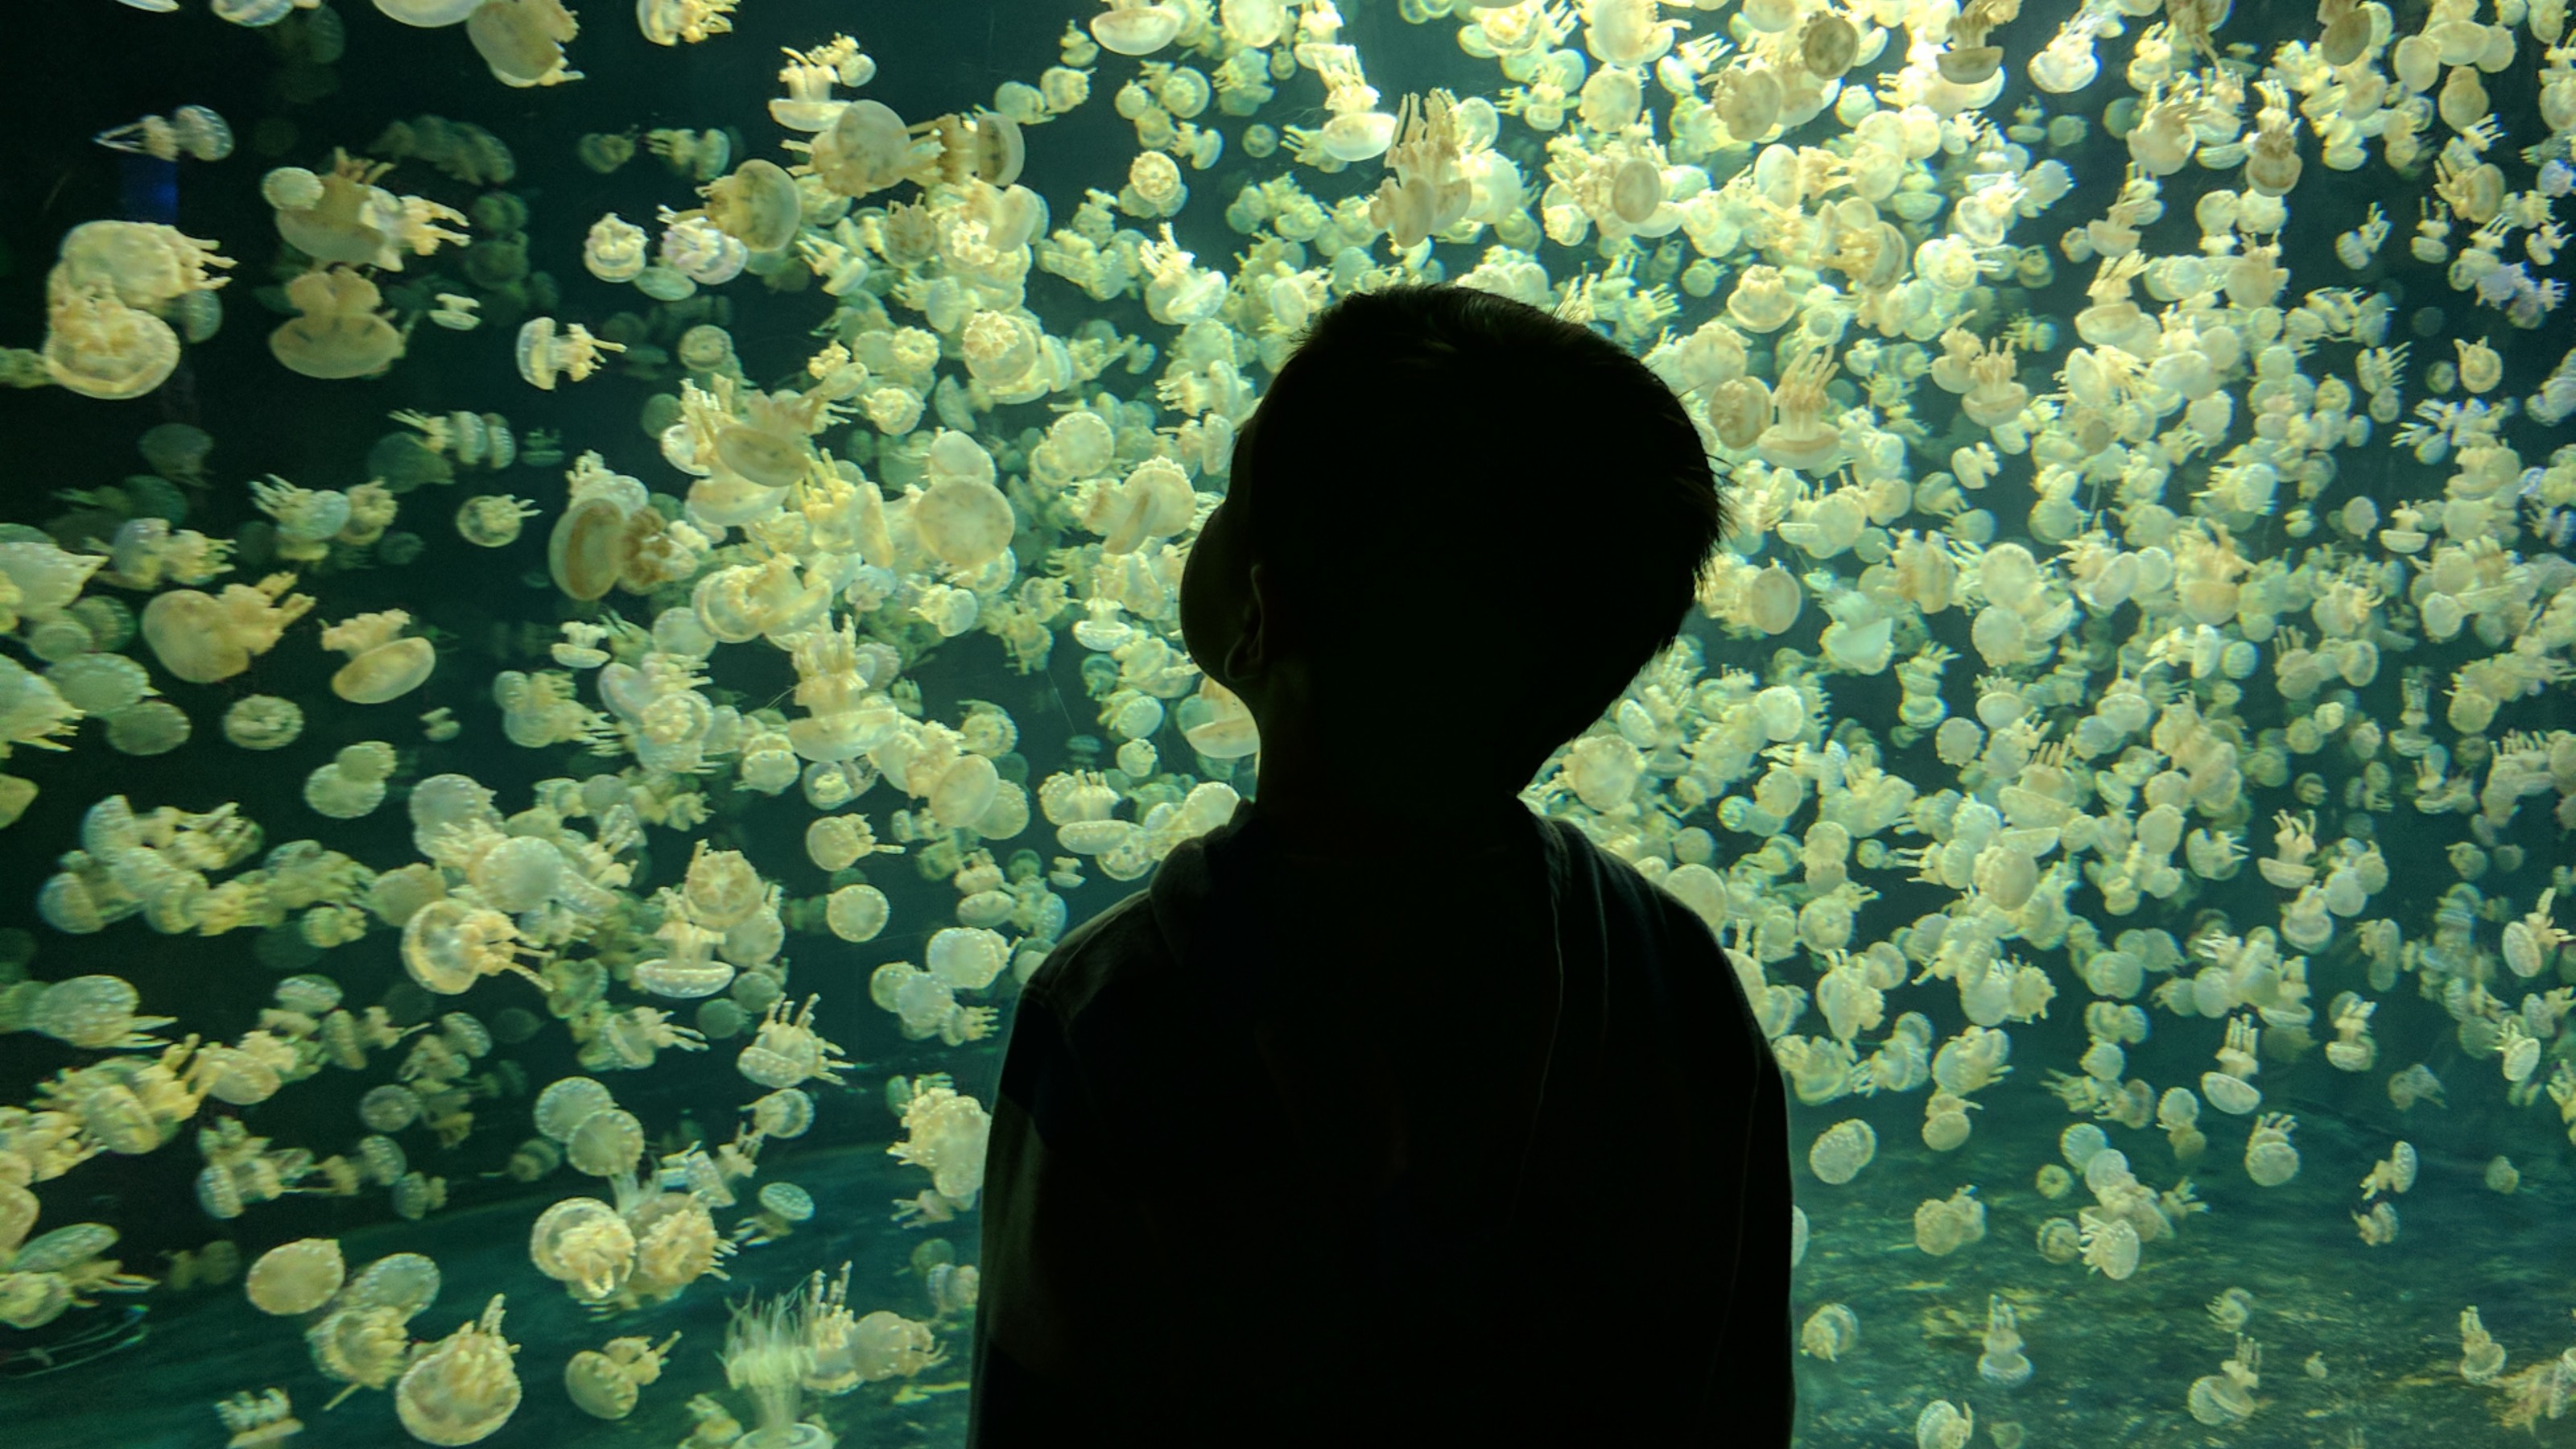 A child standing in front of a wall of jellyfish.